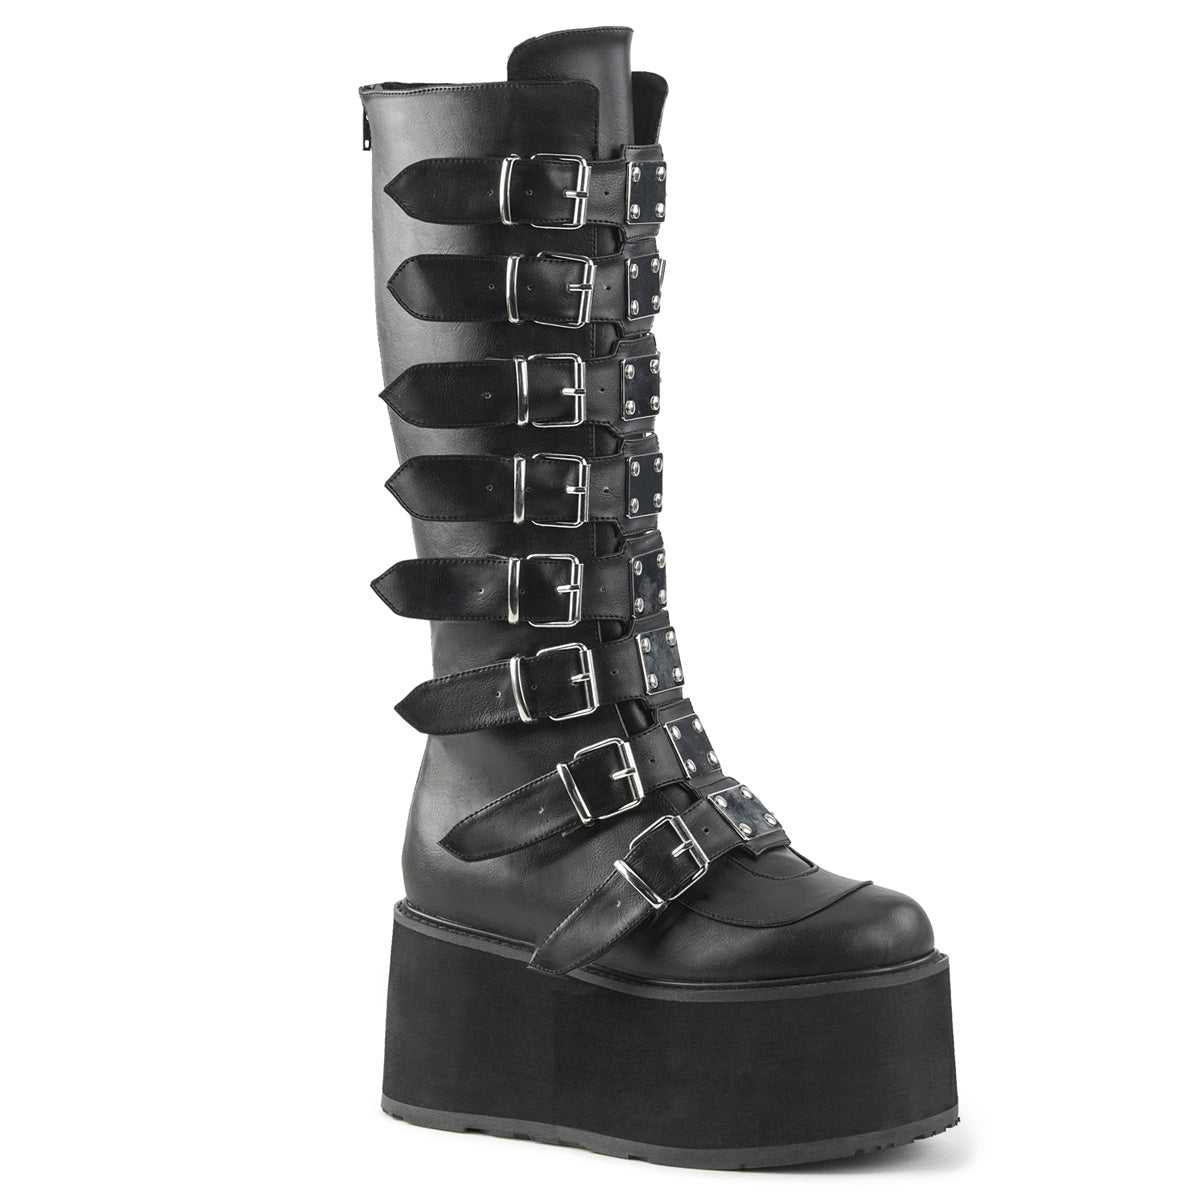 DemoniaCult Womens Boots DAMNED-318 Blk Vegan Leather